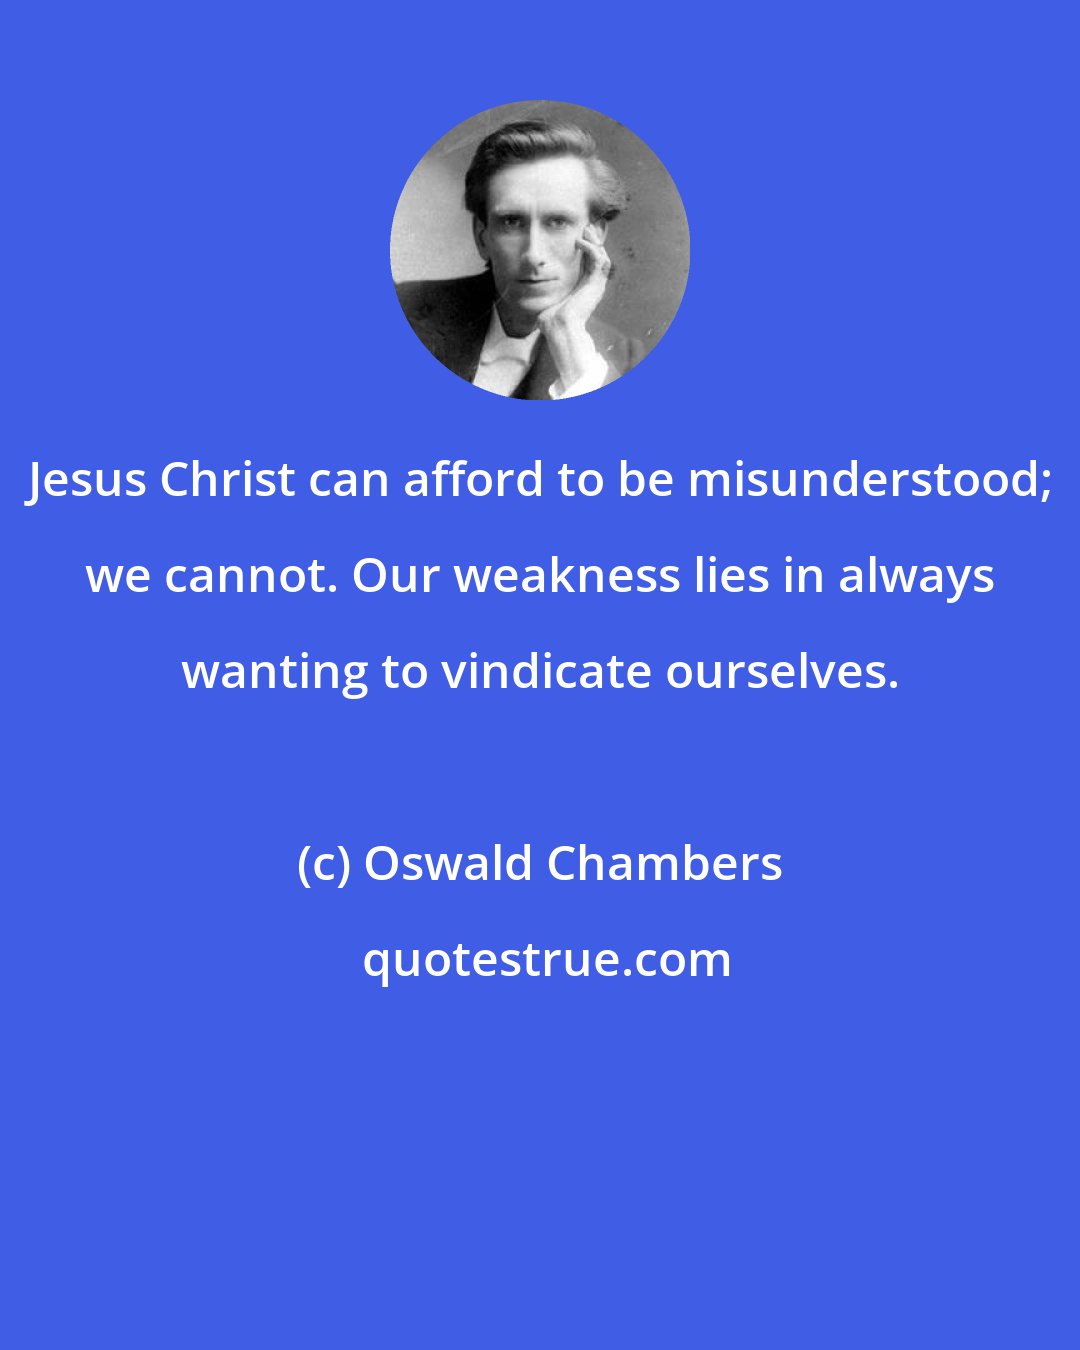 Oswald Chambers: Jesus Christ can afford to be misunderstood; we cannot. Our weakness lies in always wanting to vindicate ourselves.